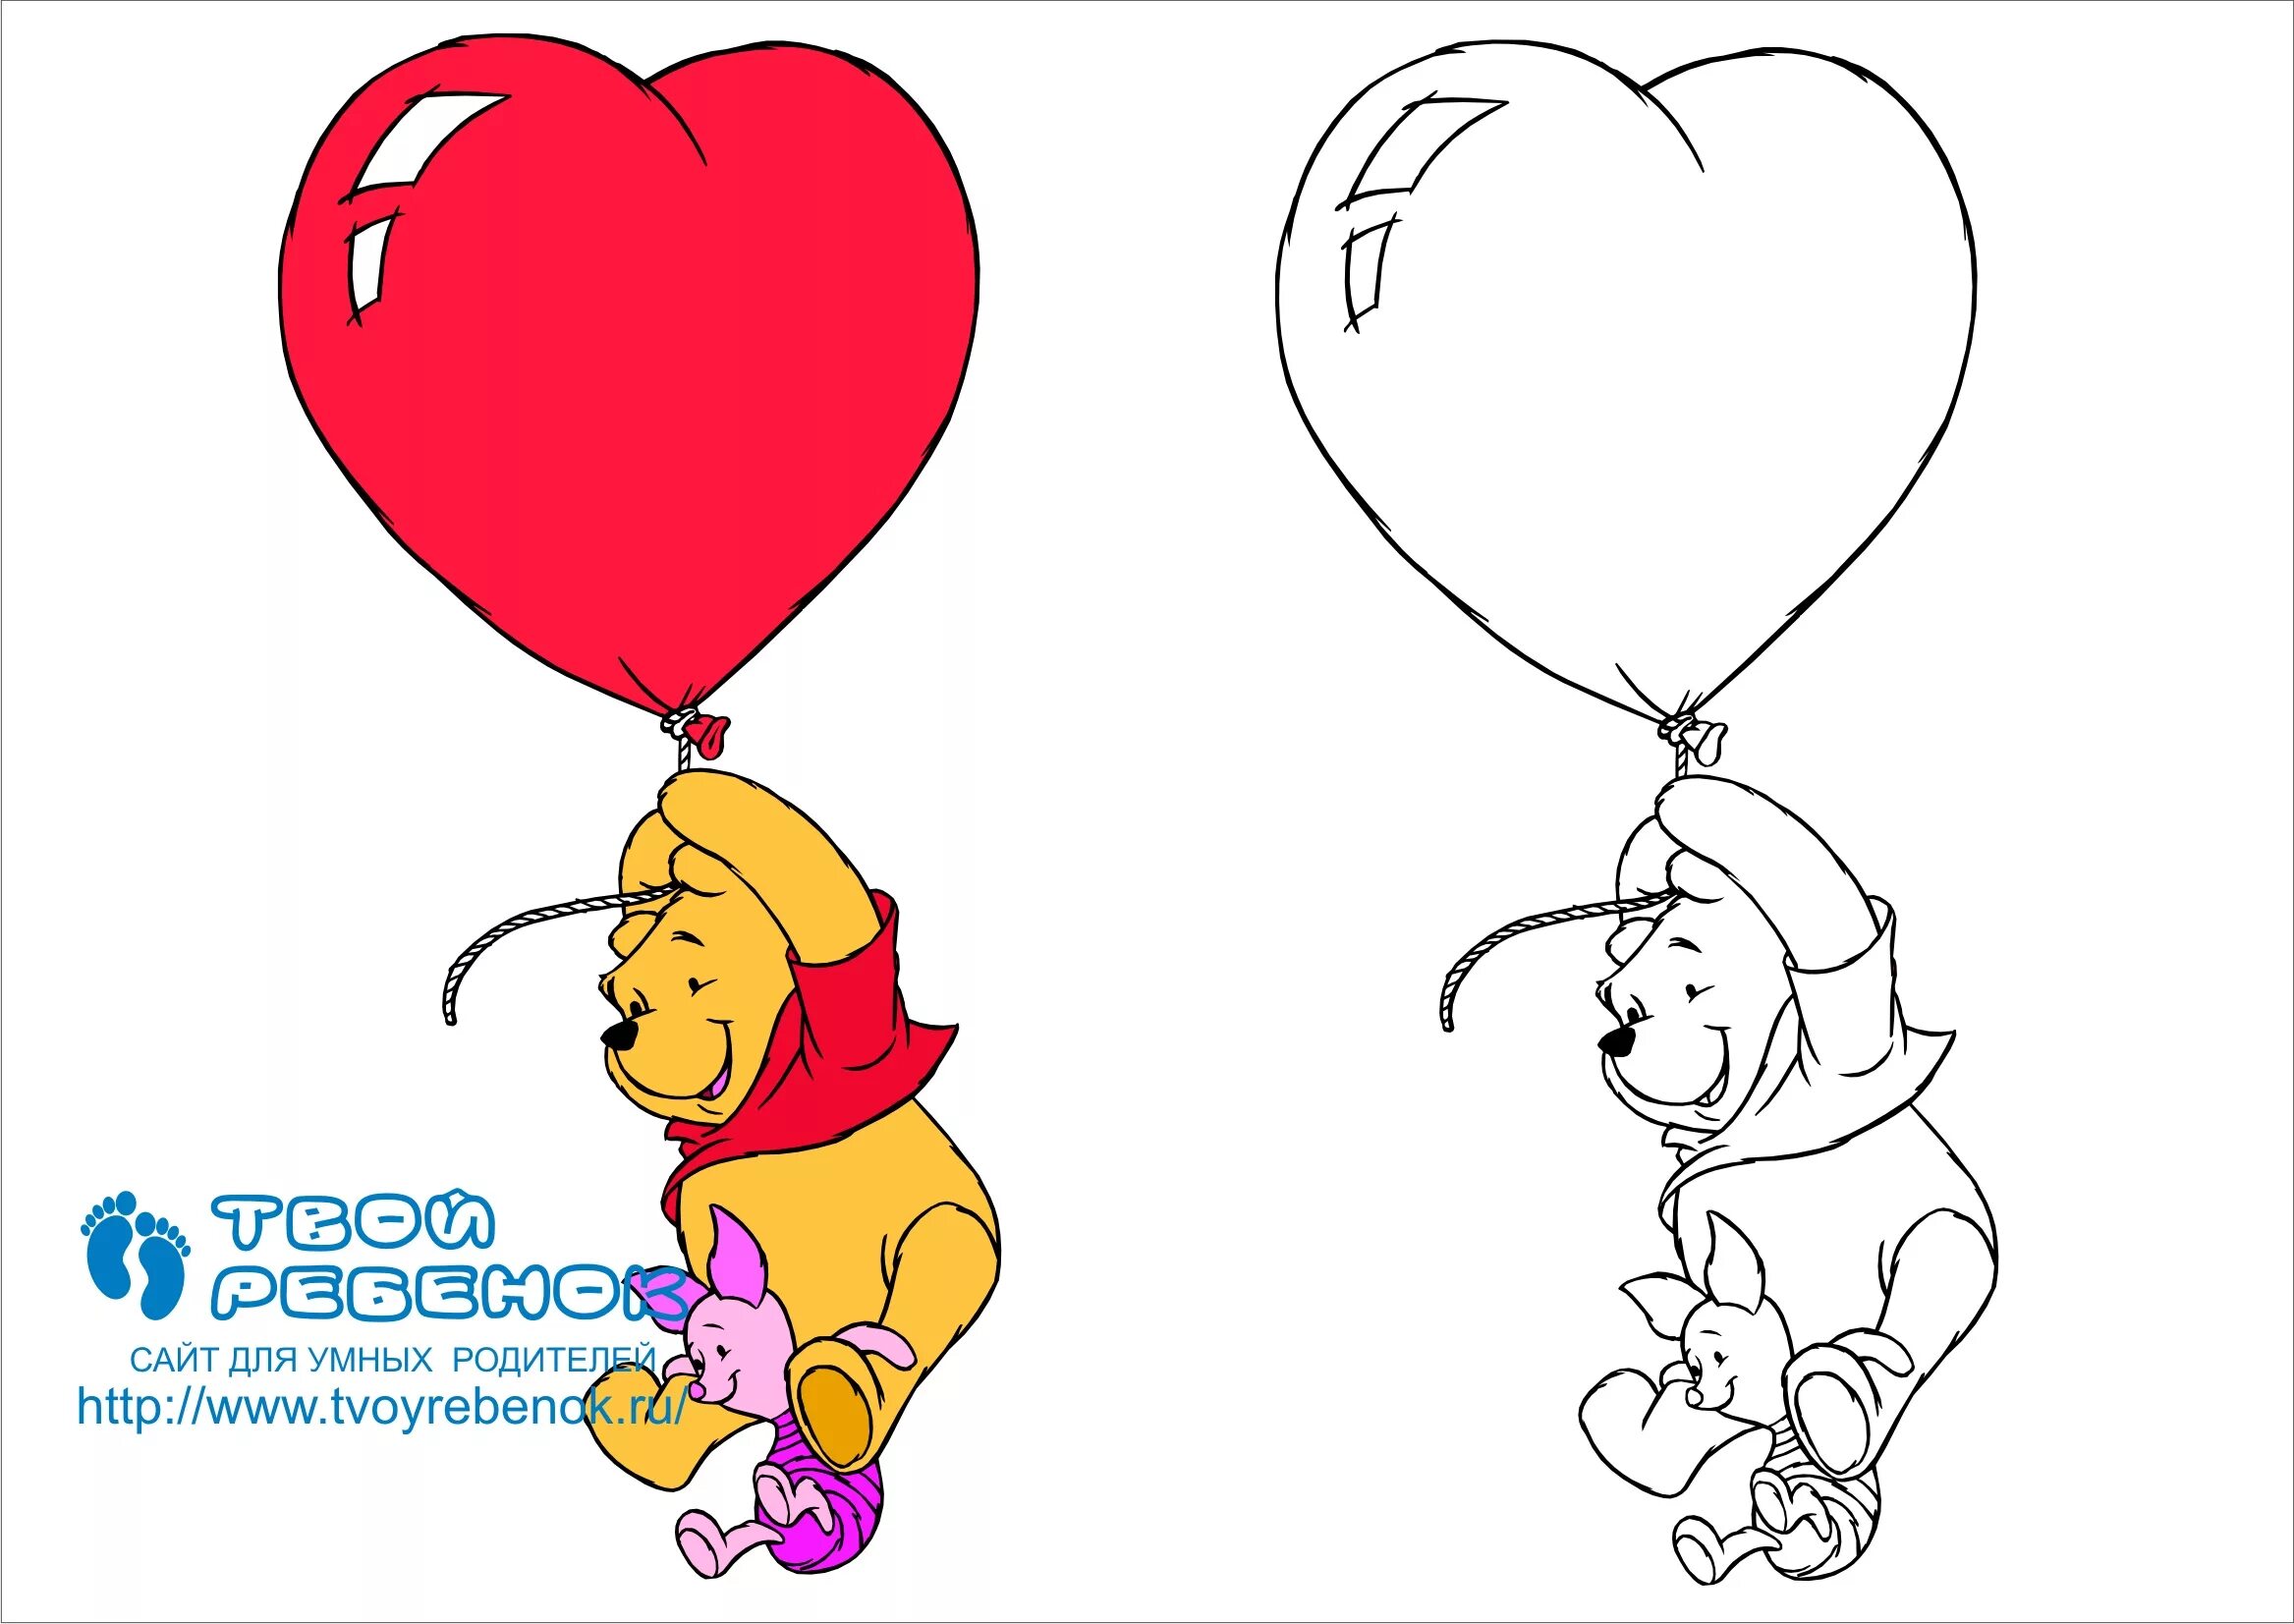 Winnie the pooh with balloon #12